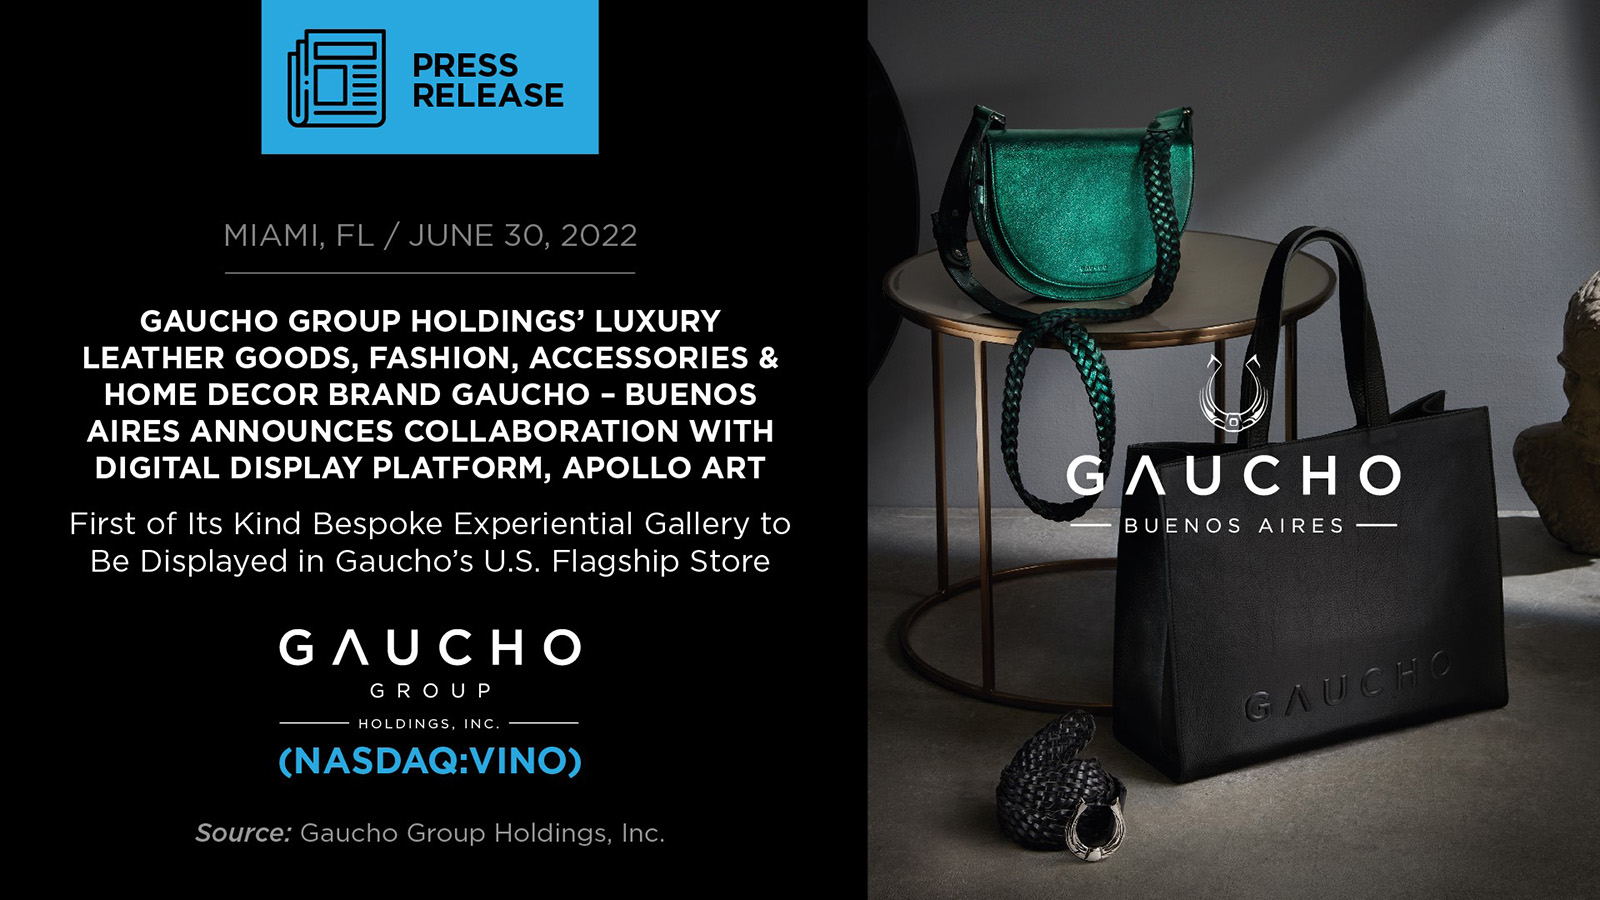 https://www.gauchoholdings.com/news/press/2022-06-30-gaucho-group-holdings-luxury-leather-goods-fashion-accessories-home-decor-brand-gaucho-buenos-aires-announces-collaboration-with-digital-display-platform-apollo-art/_res/id=Picture/2022-06-30_GGH-PR_banner_16x9.jpg